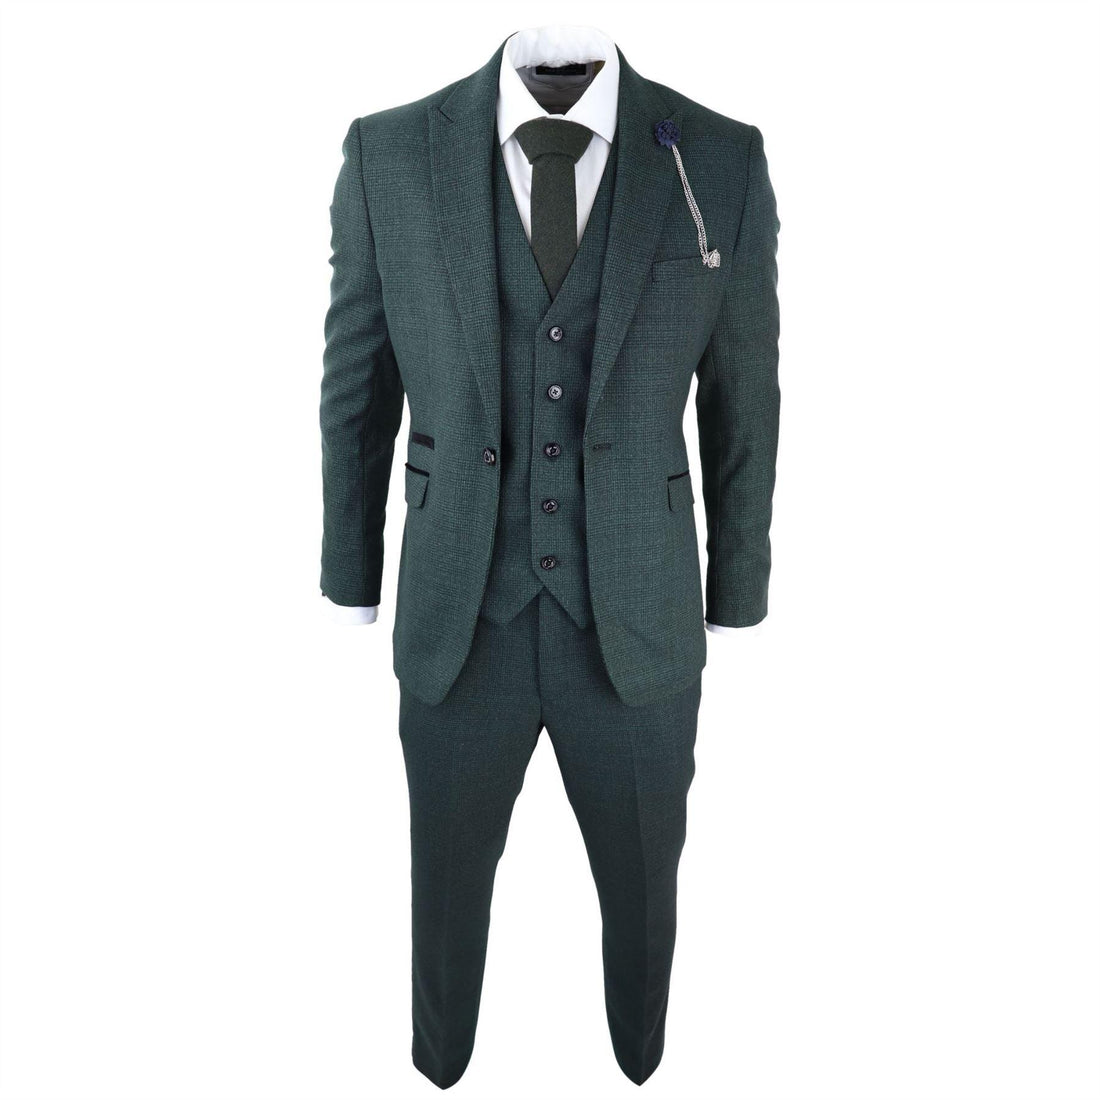 Mens 3 Piece Check Suit Tweed Olive Green Tailored Fit Wedding Peaky Classic - Knighthood Store